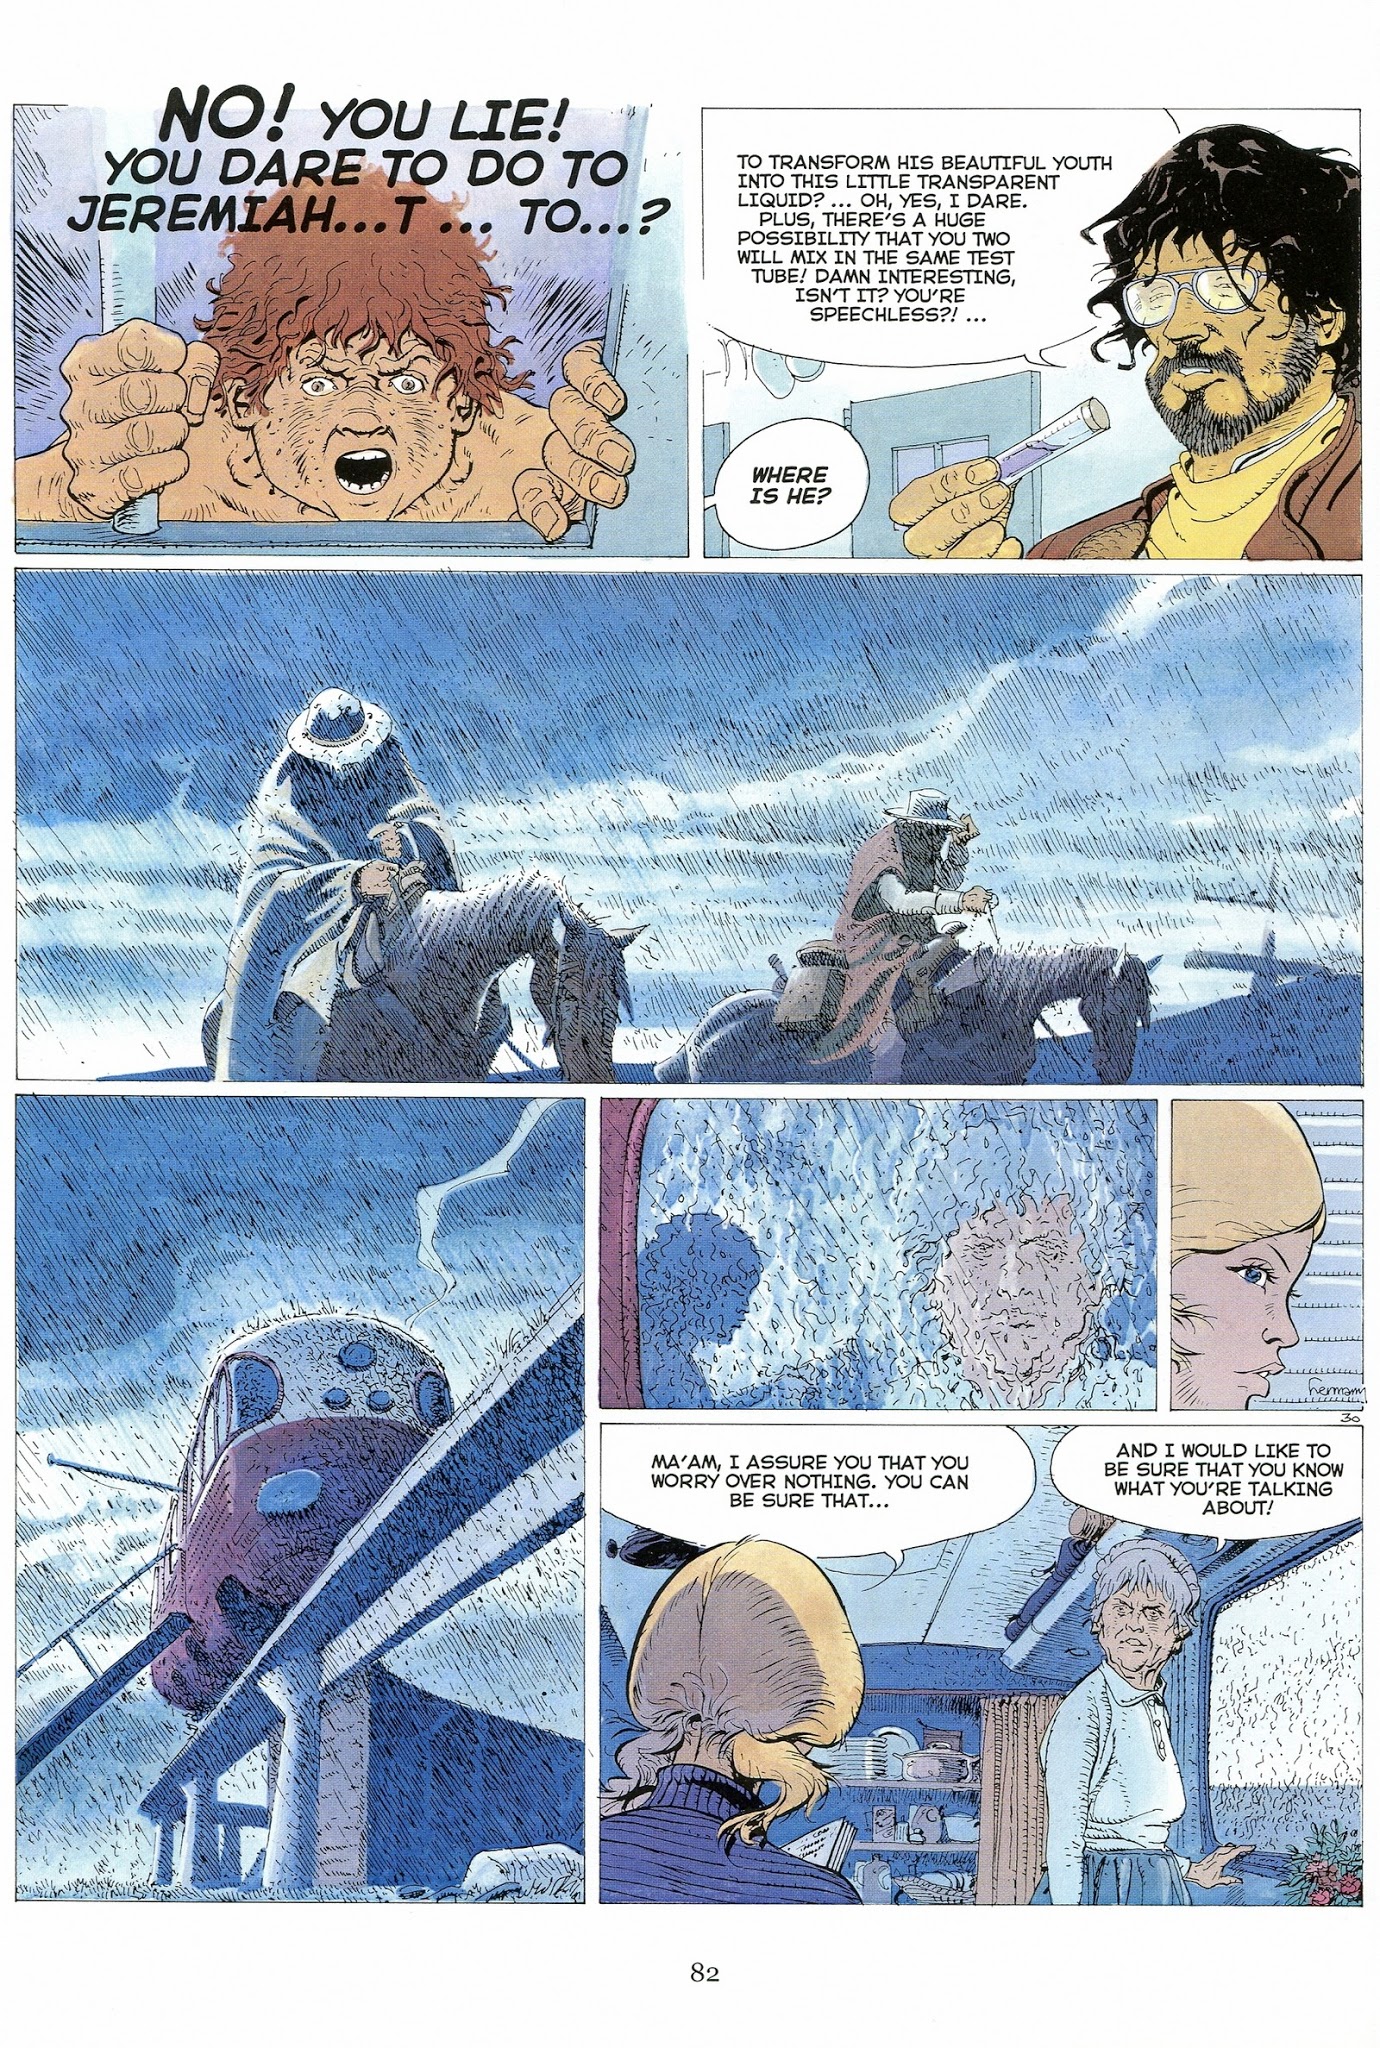 Read online Jeremiah by Hermann comic -  Issue # TPB 2 - 83